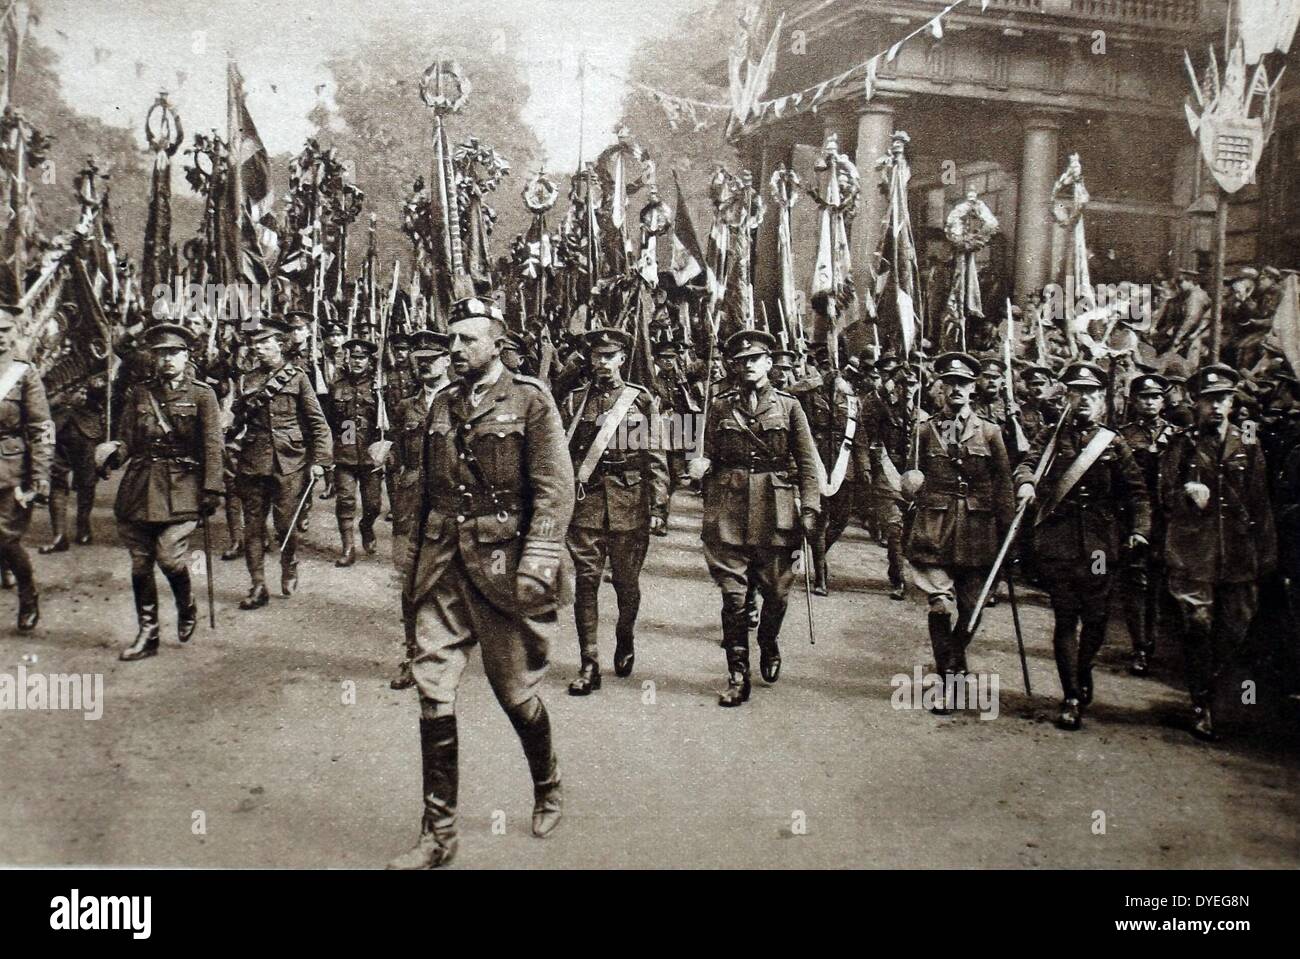 Victory parade London July 1919. soldiers who took part in World War I pass in front of crowds of onlookers Stock Photo